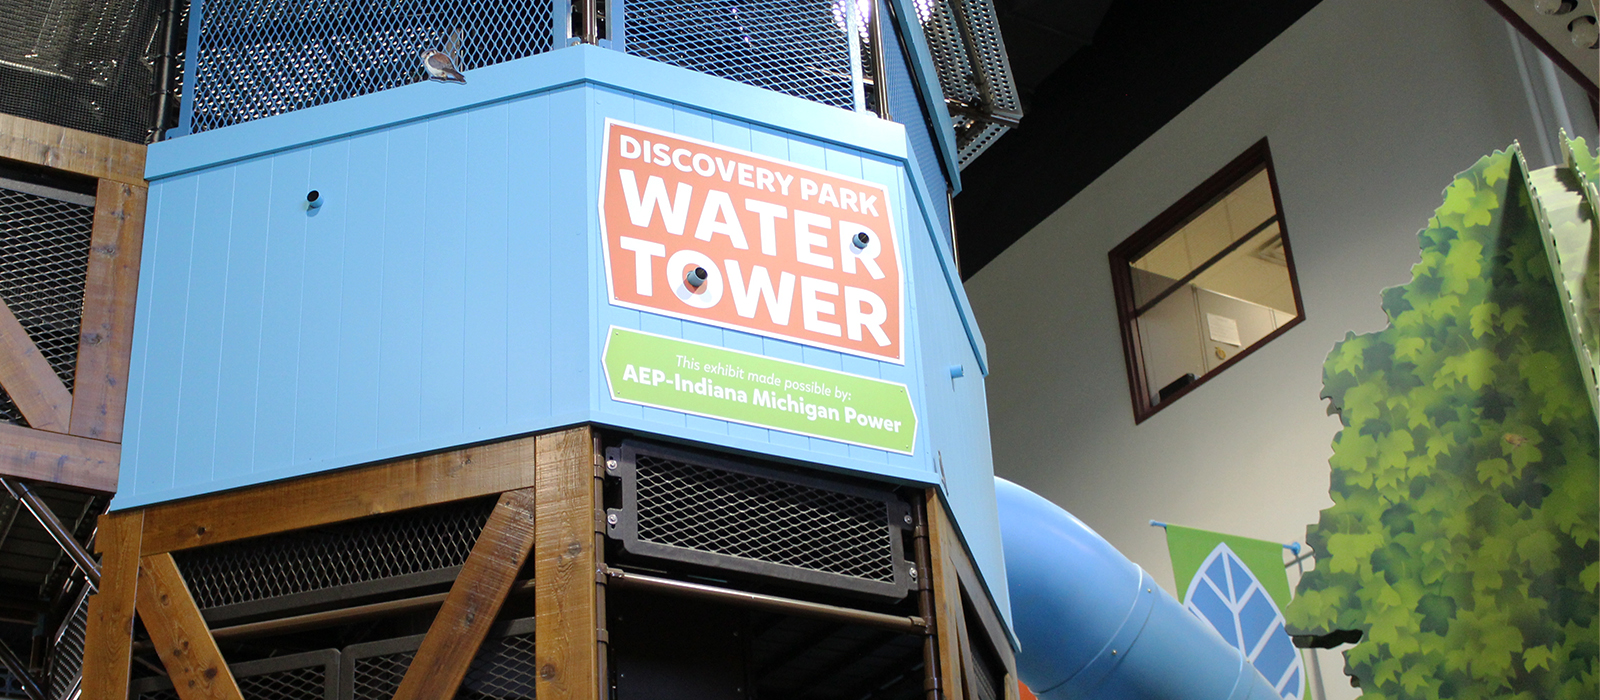 American Electric Power (AEP) sign on the Discovery Park water tower